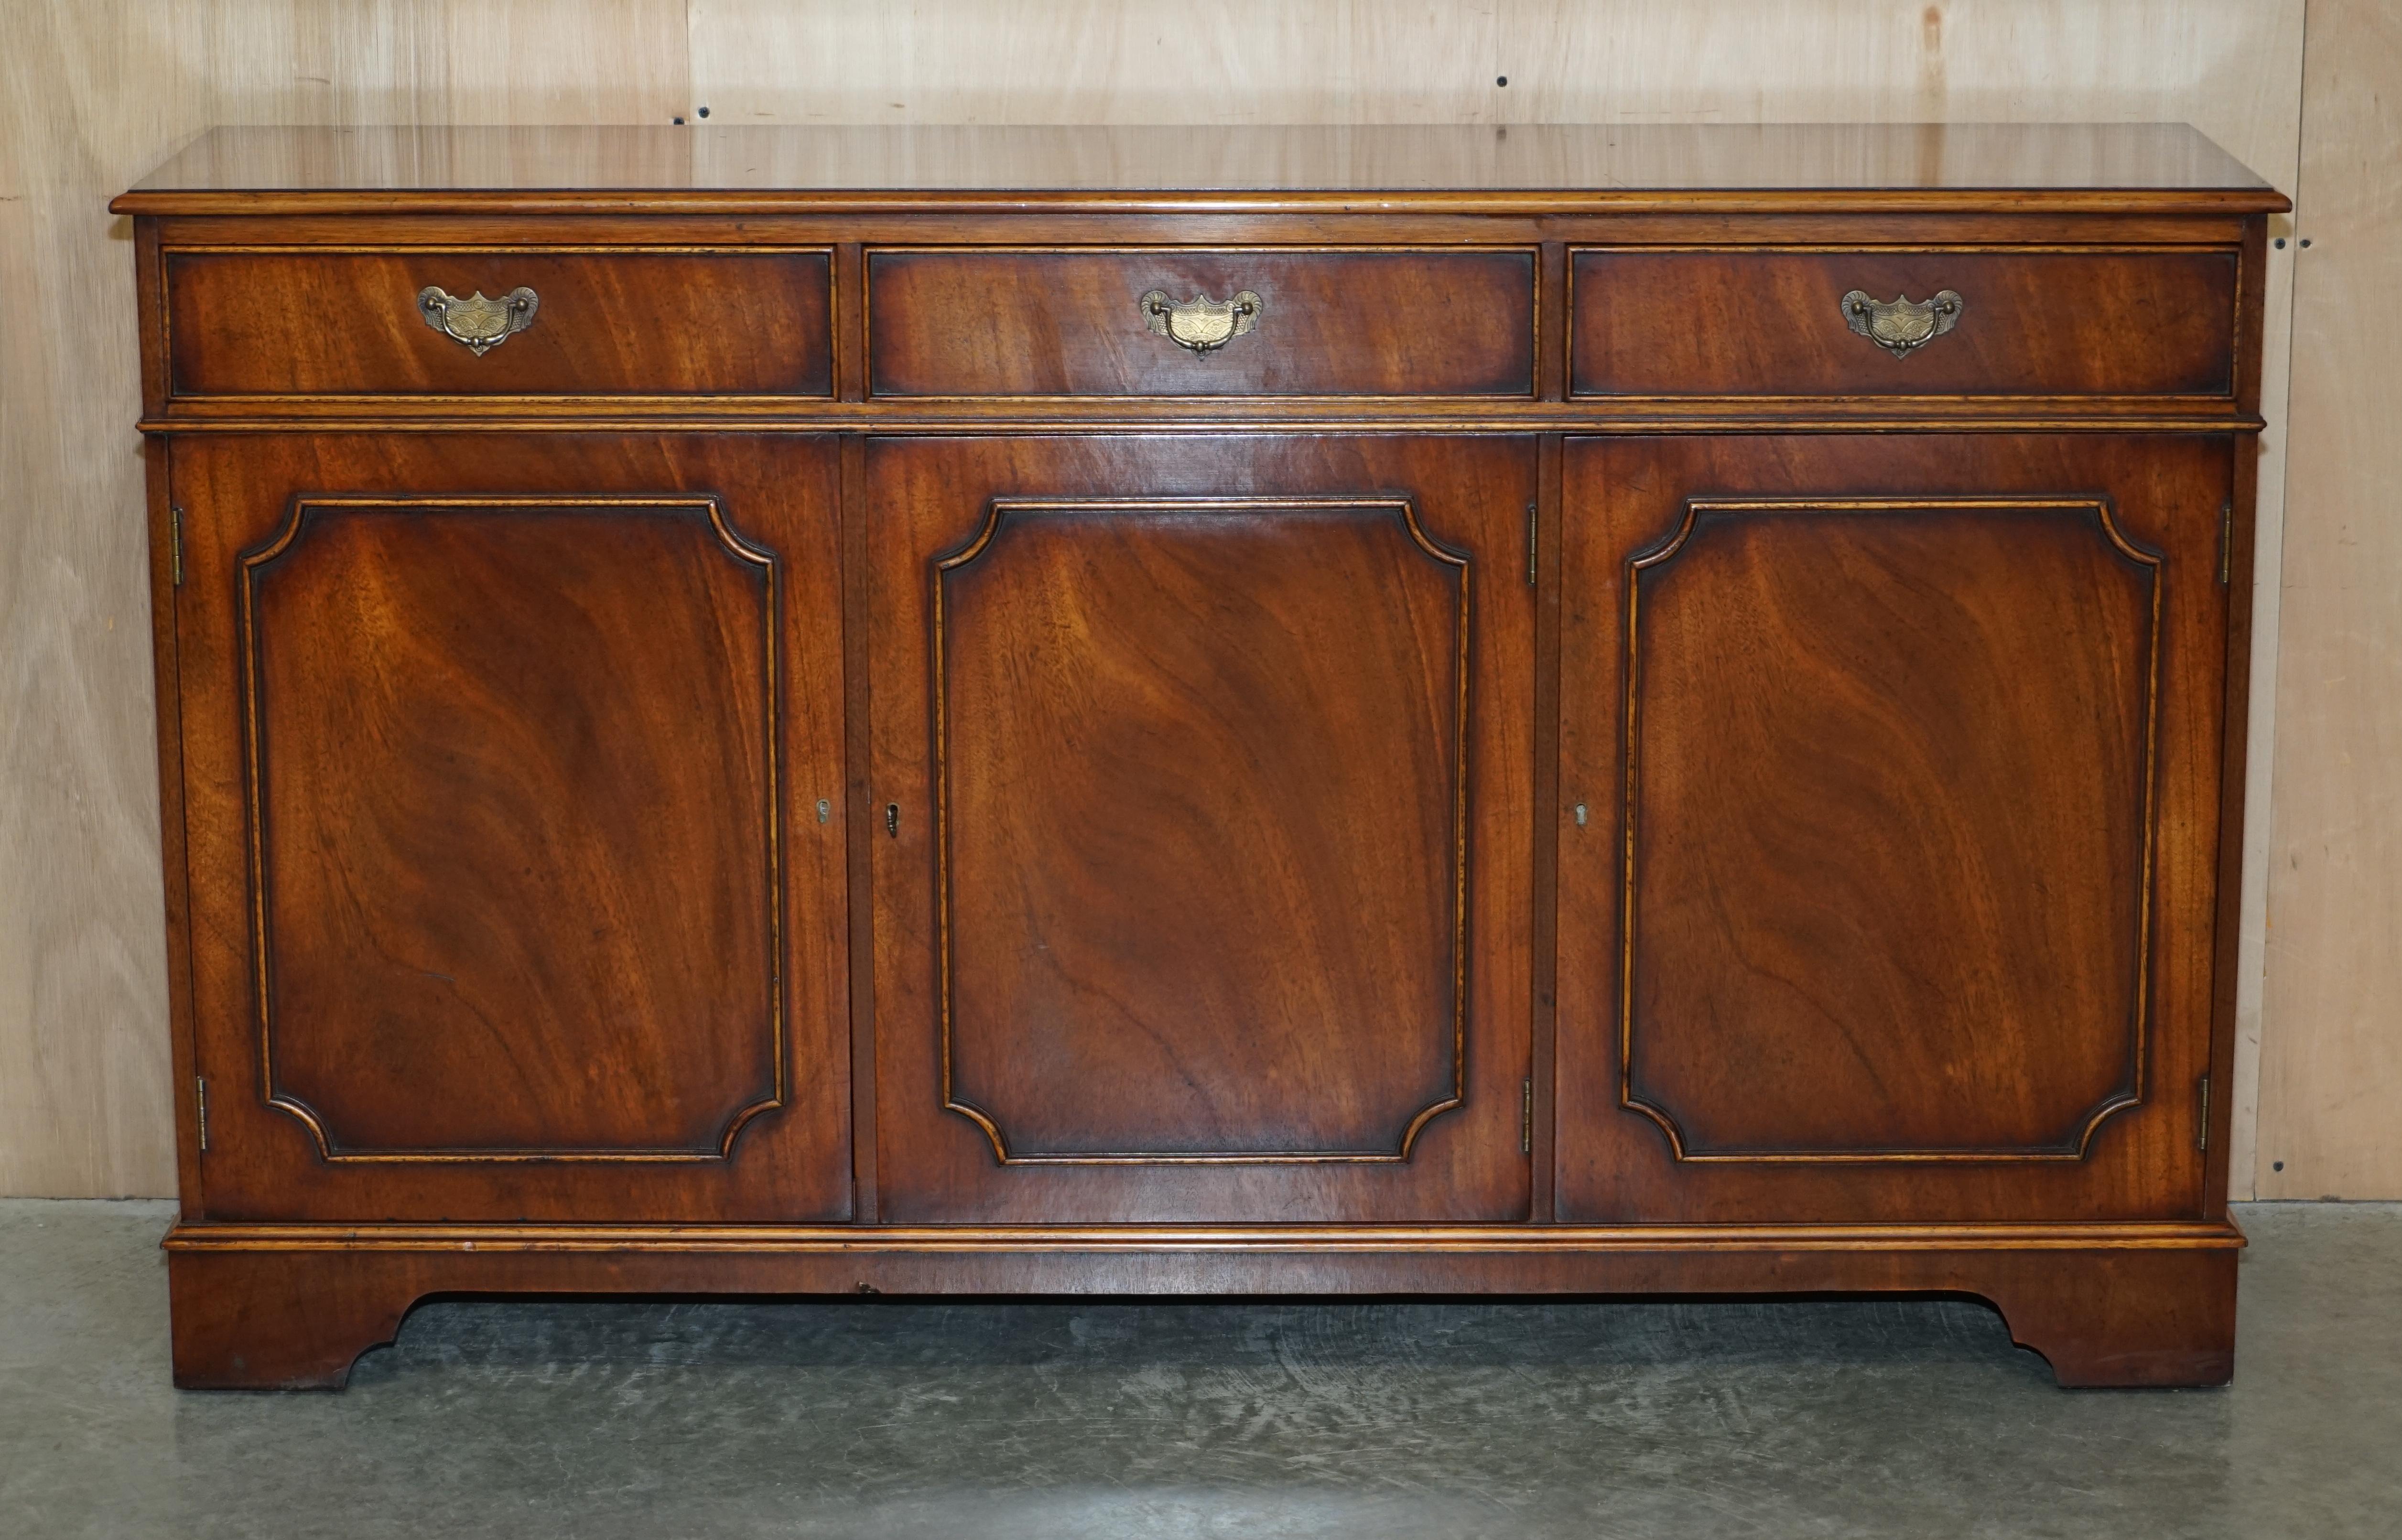 We are delighted to offer for sale this exquisite, Flamed Mahogany sideboard with three large drawers to the top and bookcase shelves inside 

A very good looking and well made piece, this is basically art furniture, the grain of timber in the